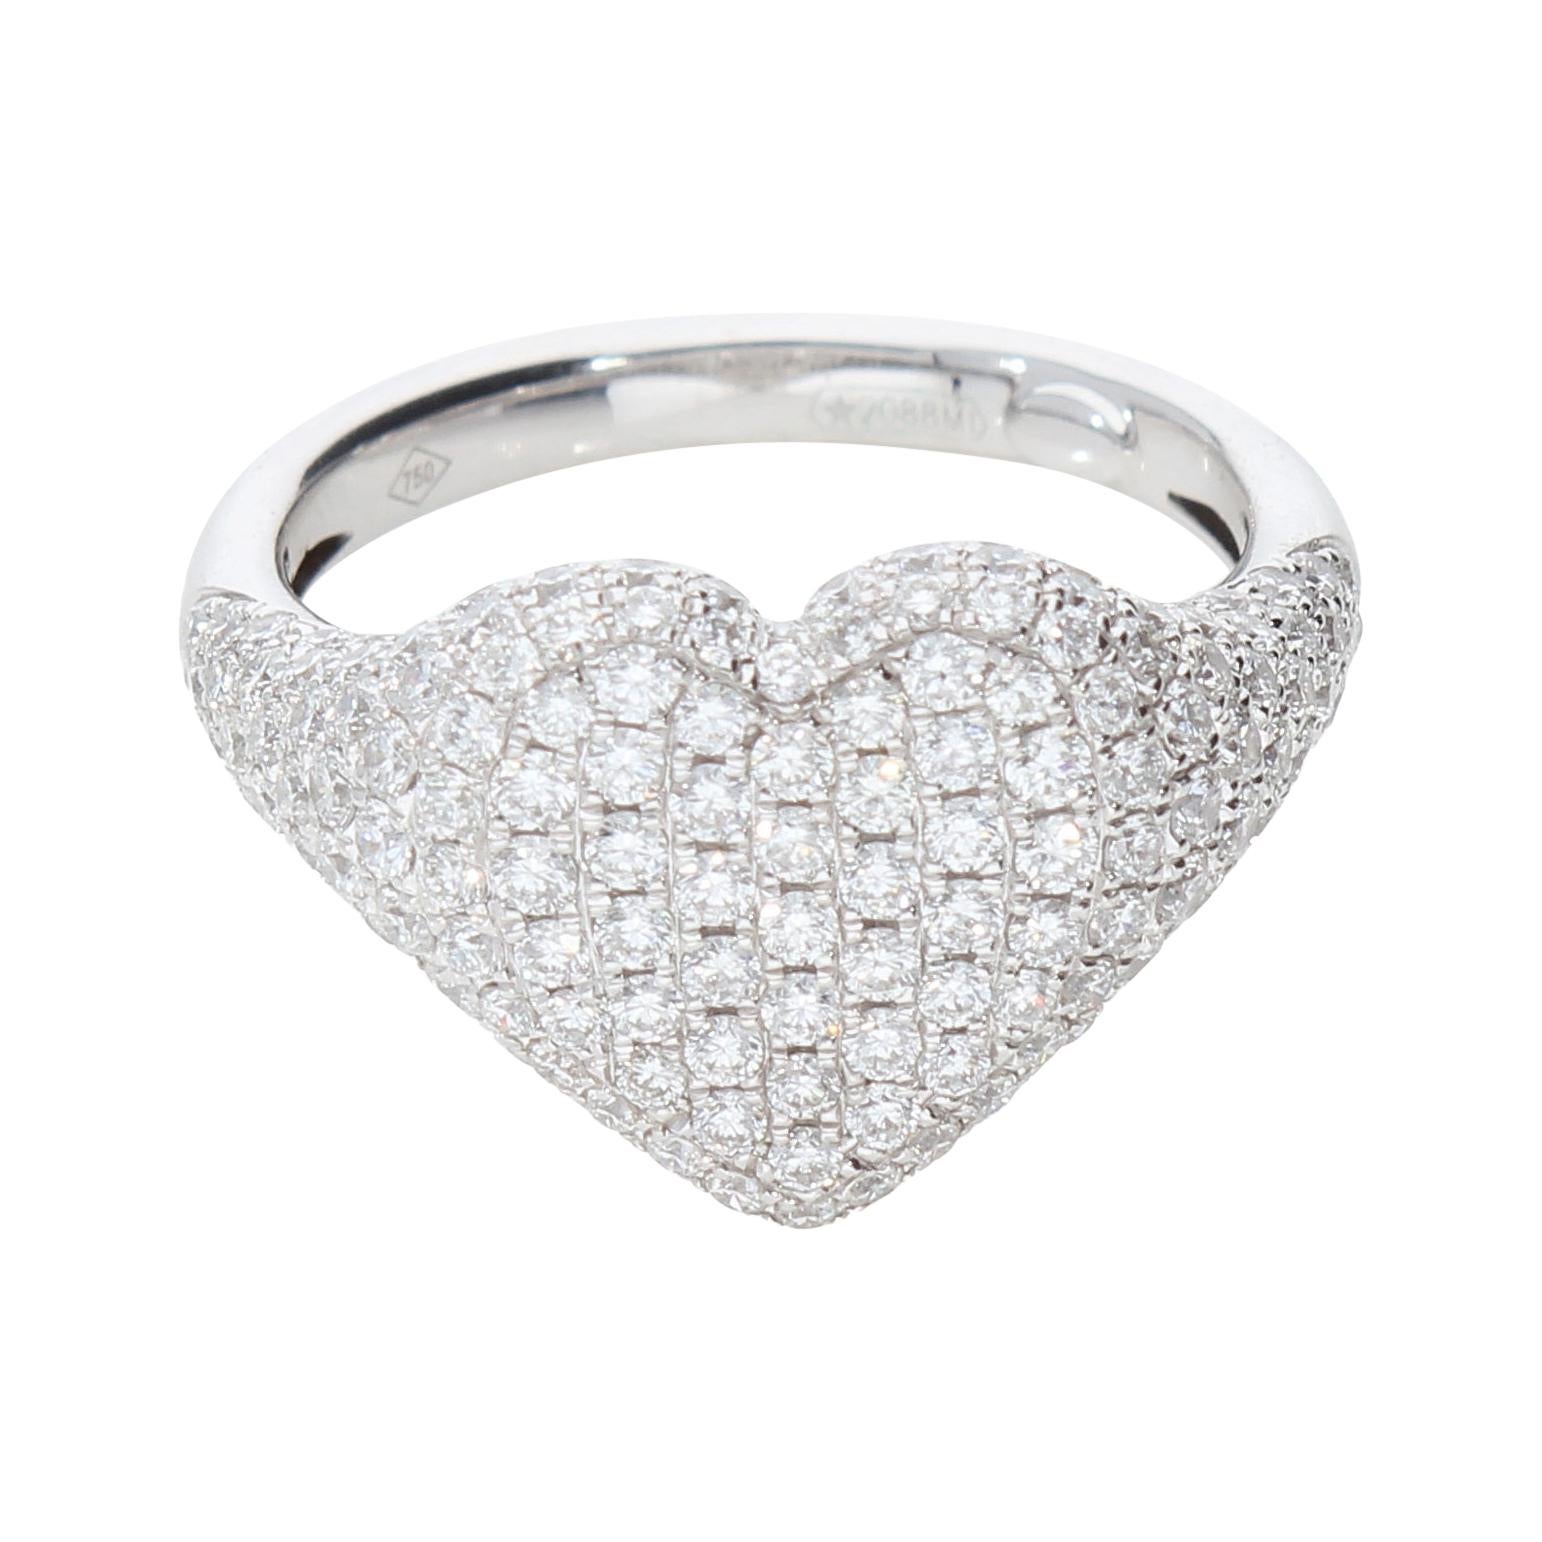 Diamonds ct 1.73, Contemporary Heart Ring in 18 Kt Gold. Made in Italy